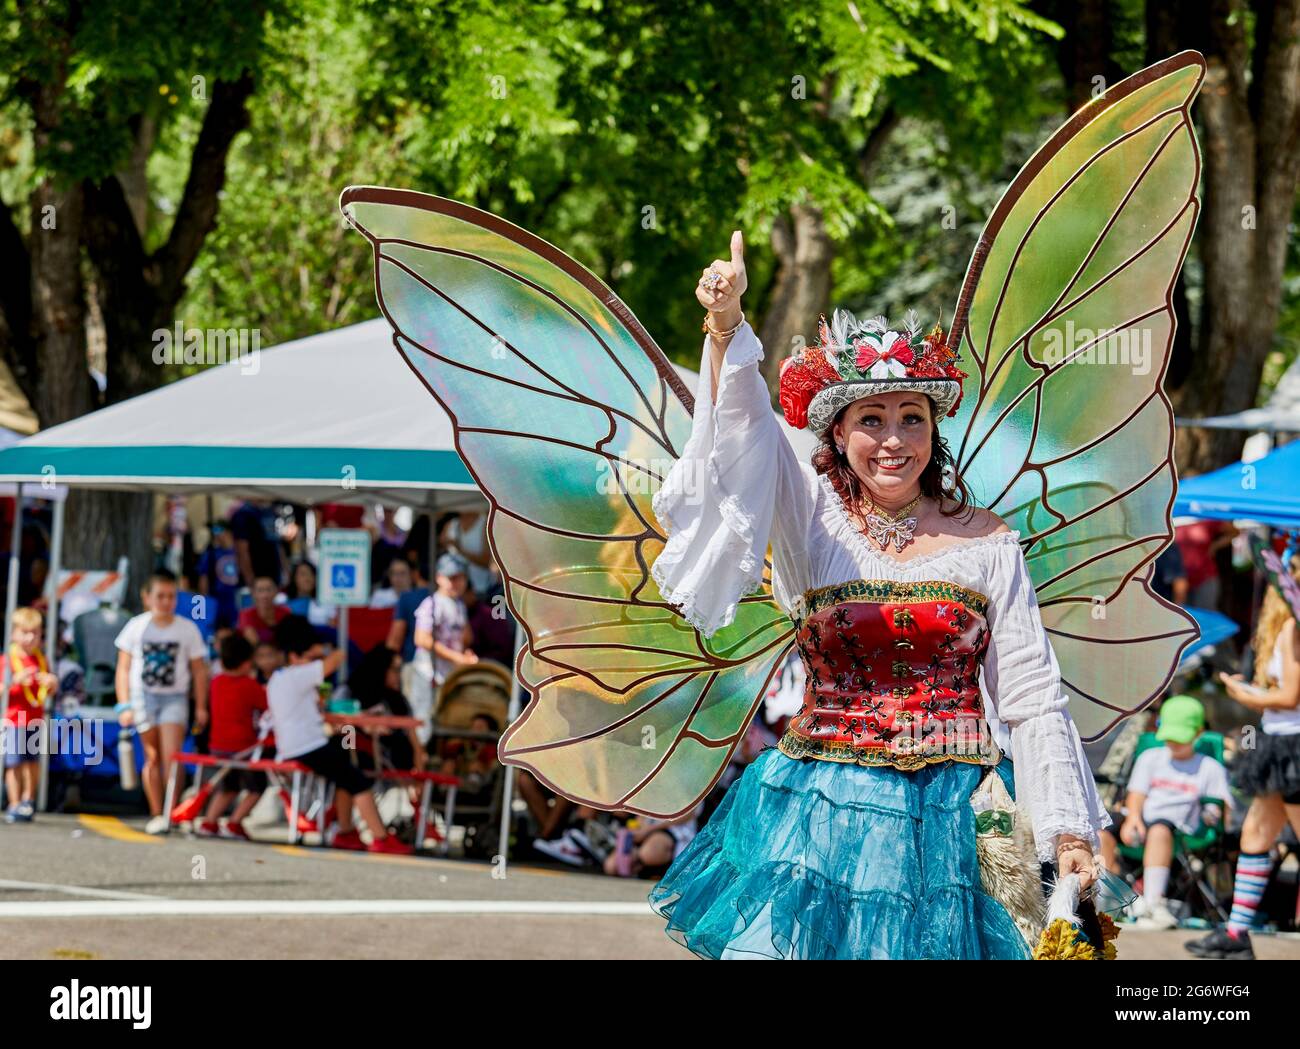 Prescott, Arizona, USA - July 3, 2021: Woman dressed in a butterfly costume with wings waving to the spectators in the 4th of July parade Stock Photo